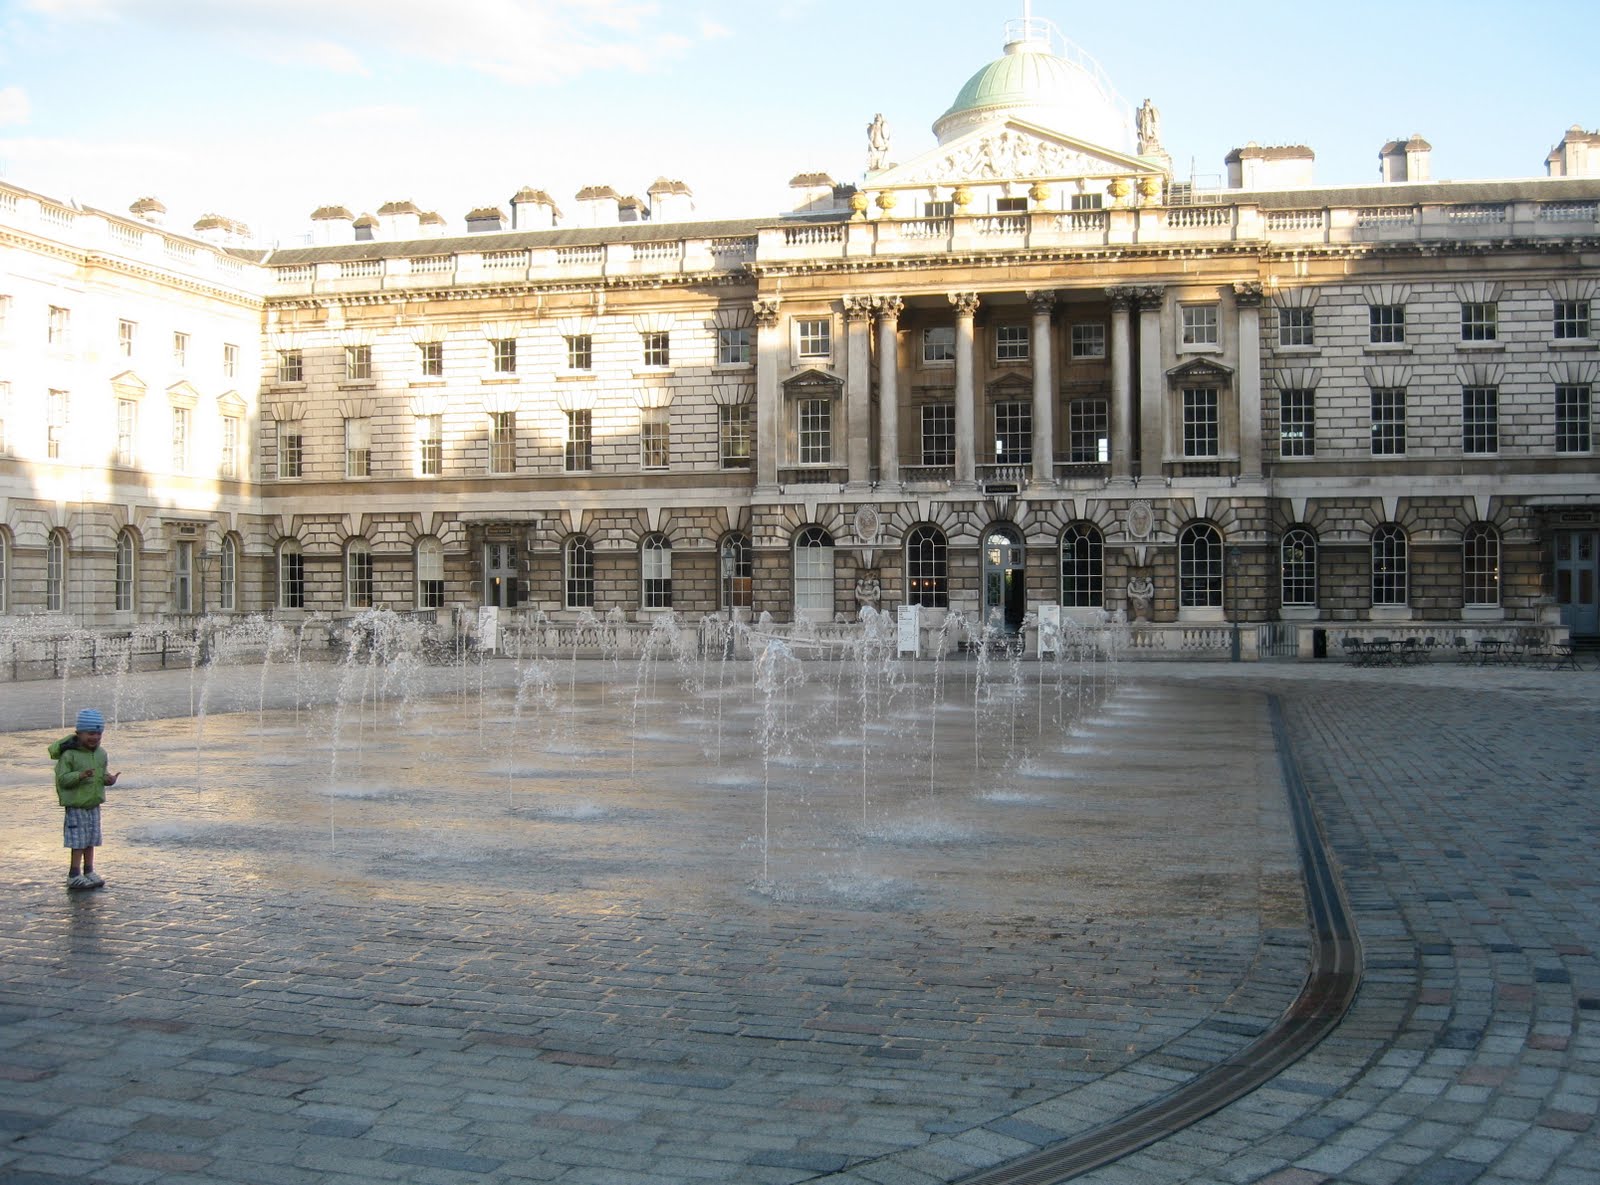 Download this Somerset House picture